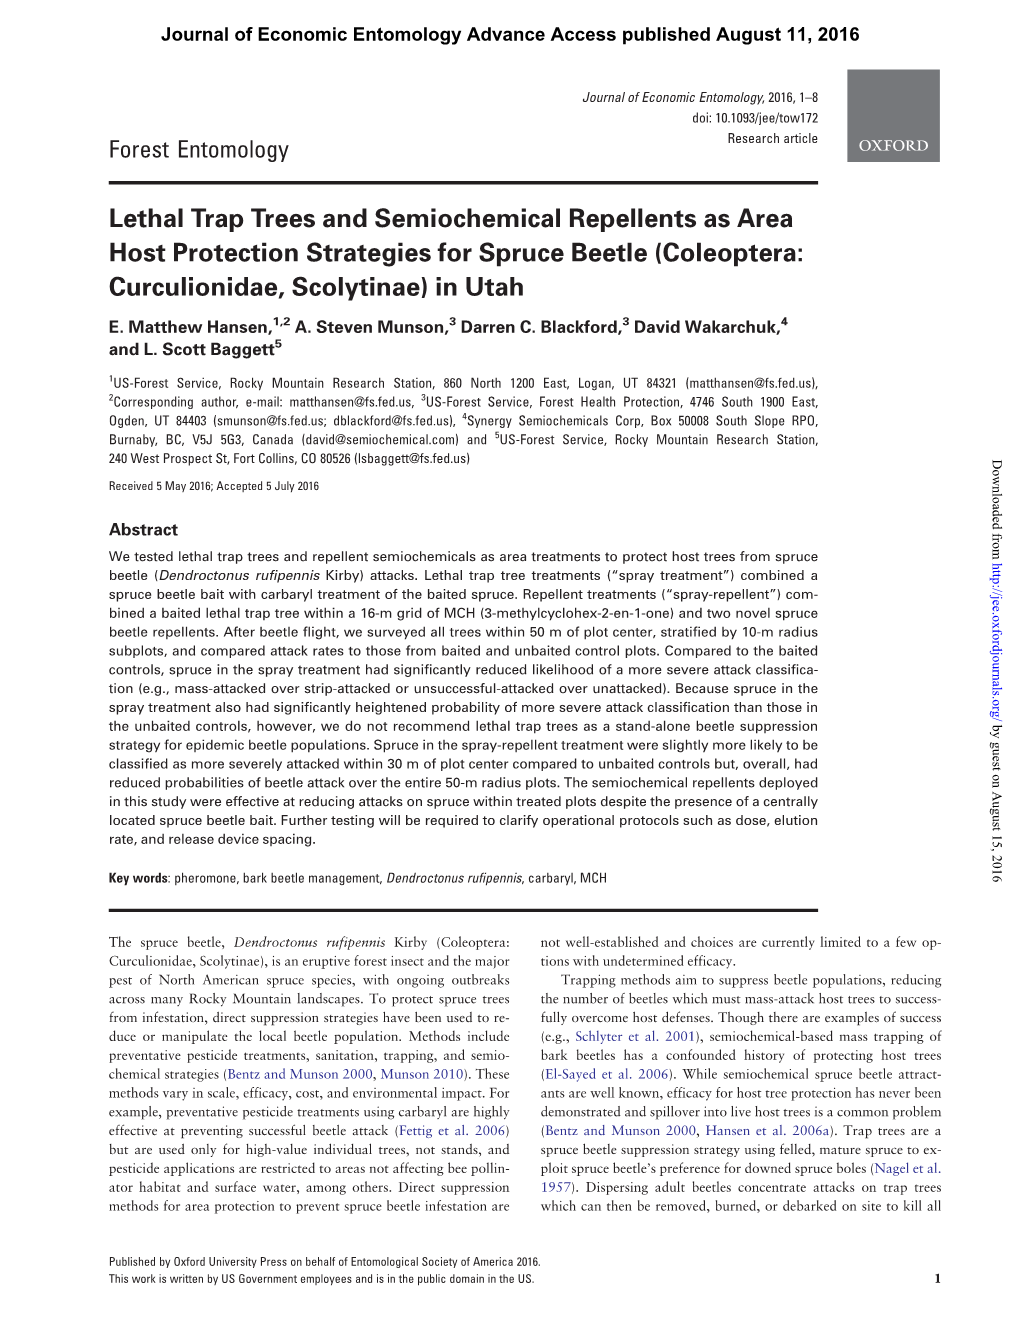 Lethal Trap Trees and Semiochemical Repellents As Area Host Protection Strategies for Spruce Beetle (Coleoptera: Curculionidae, Scolytinae) in Utah